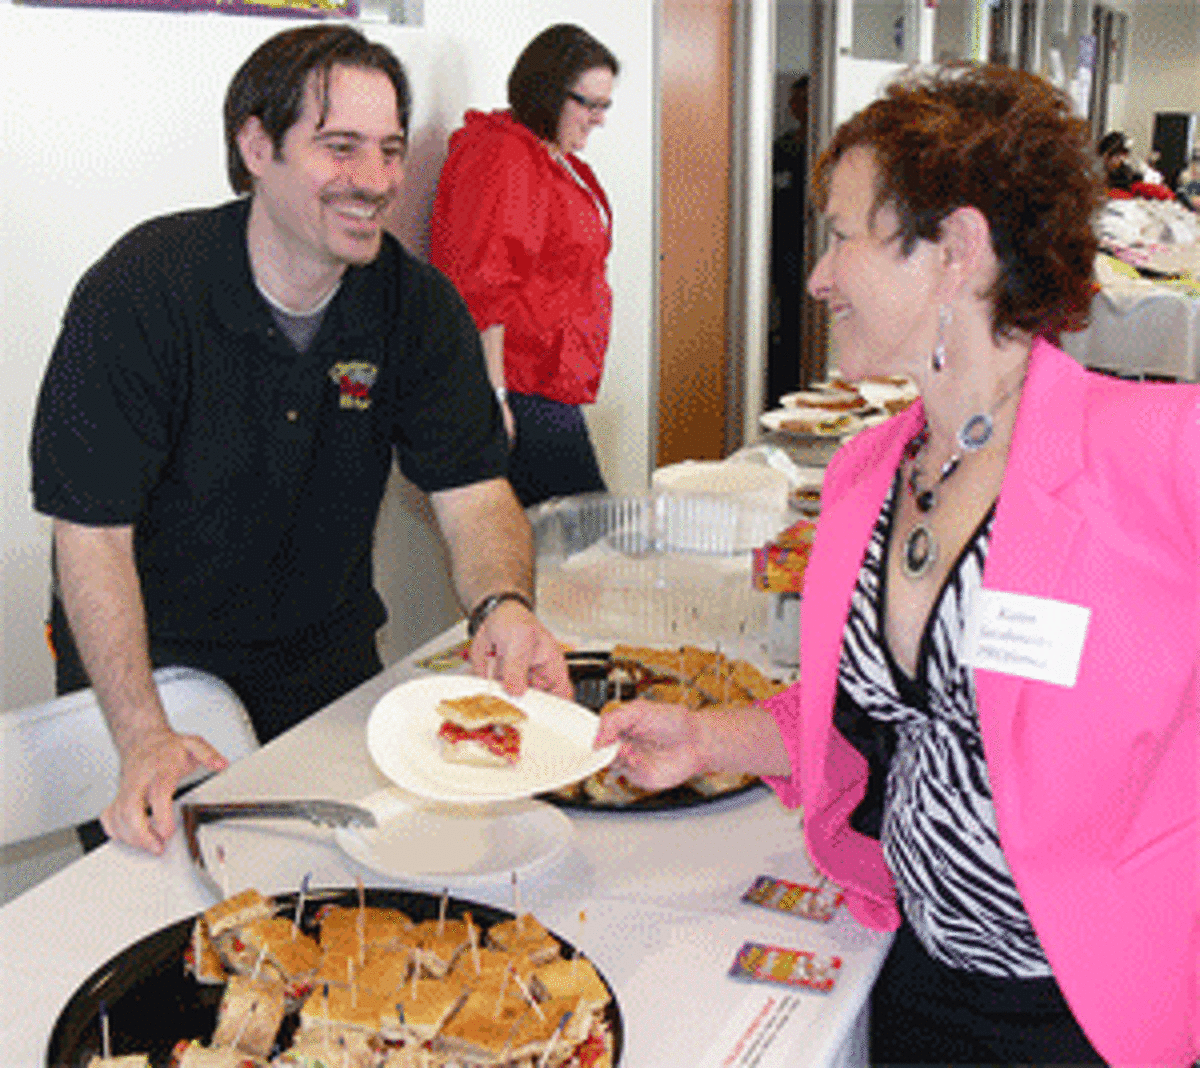 Joe DeVellis of Giove’s Pizza Kitchen hands a piece of focaccia to Karen Jacobowitz of Proforma, a printing, promotions and branding company, during the 2013 chamber expo.